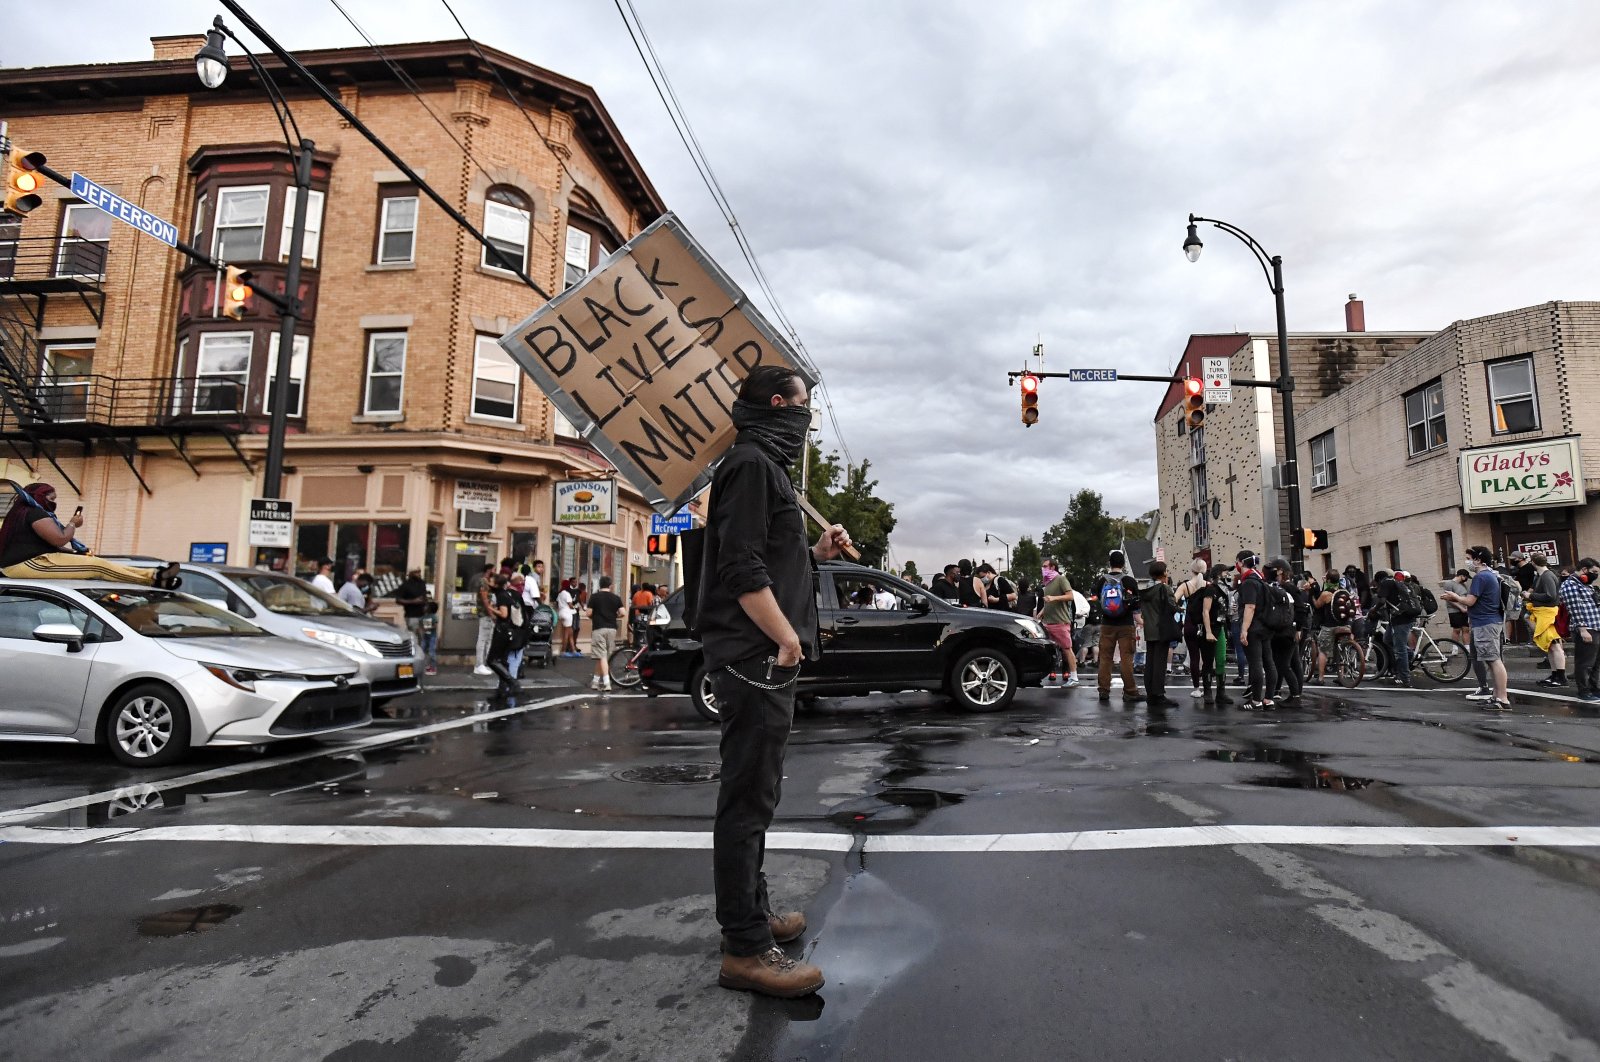 A crowd of protesters gather near the site where Daniel Prude was restrained by police officers, Rochester, N.Y., Sept. 2, 2020. (AP Photo)